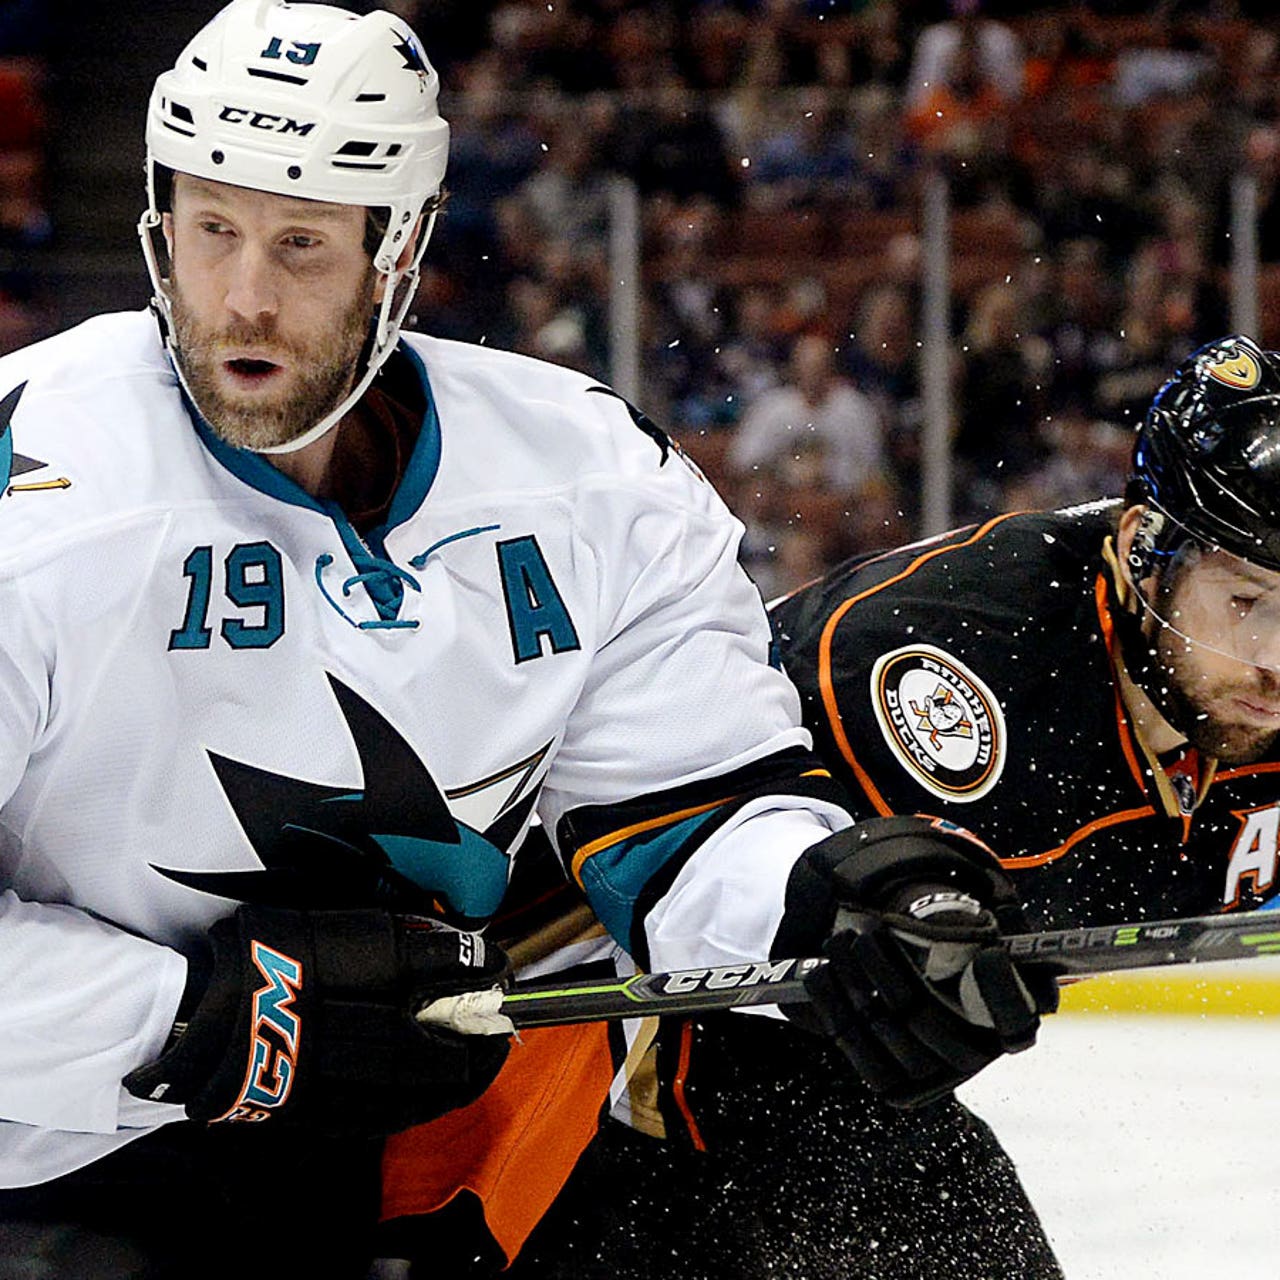 San Jose Sharks' Joe Thornton suspended for Game 4 after illegal